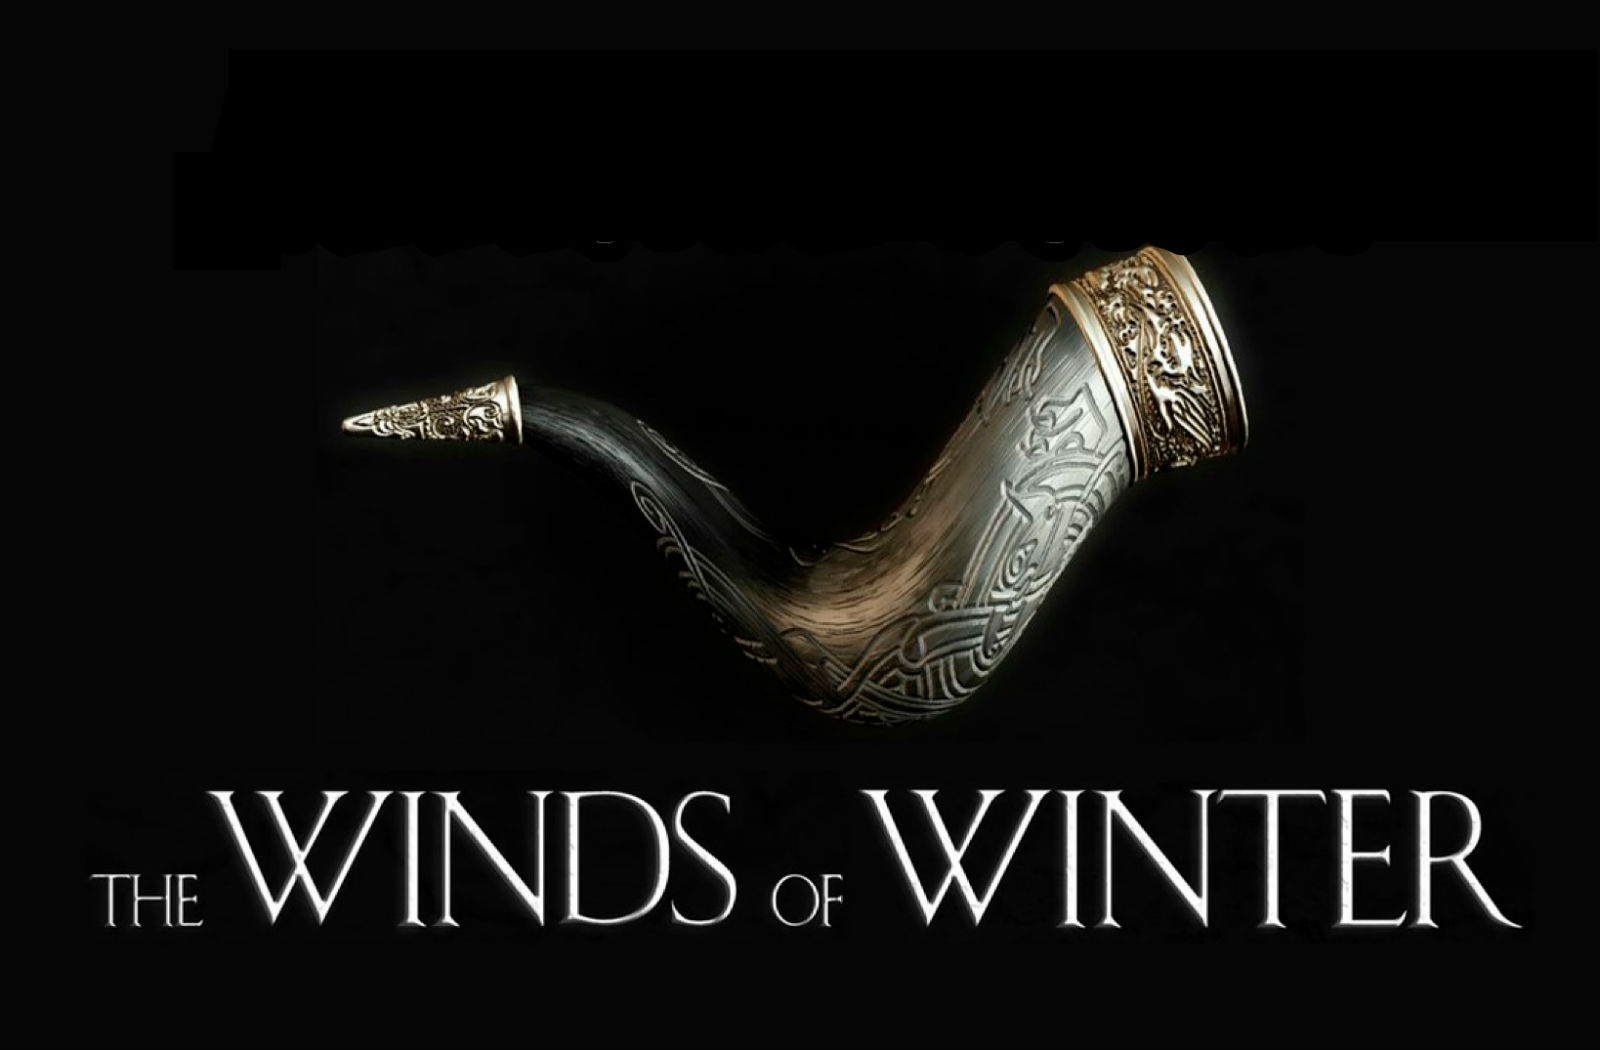 The winds of winter